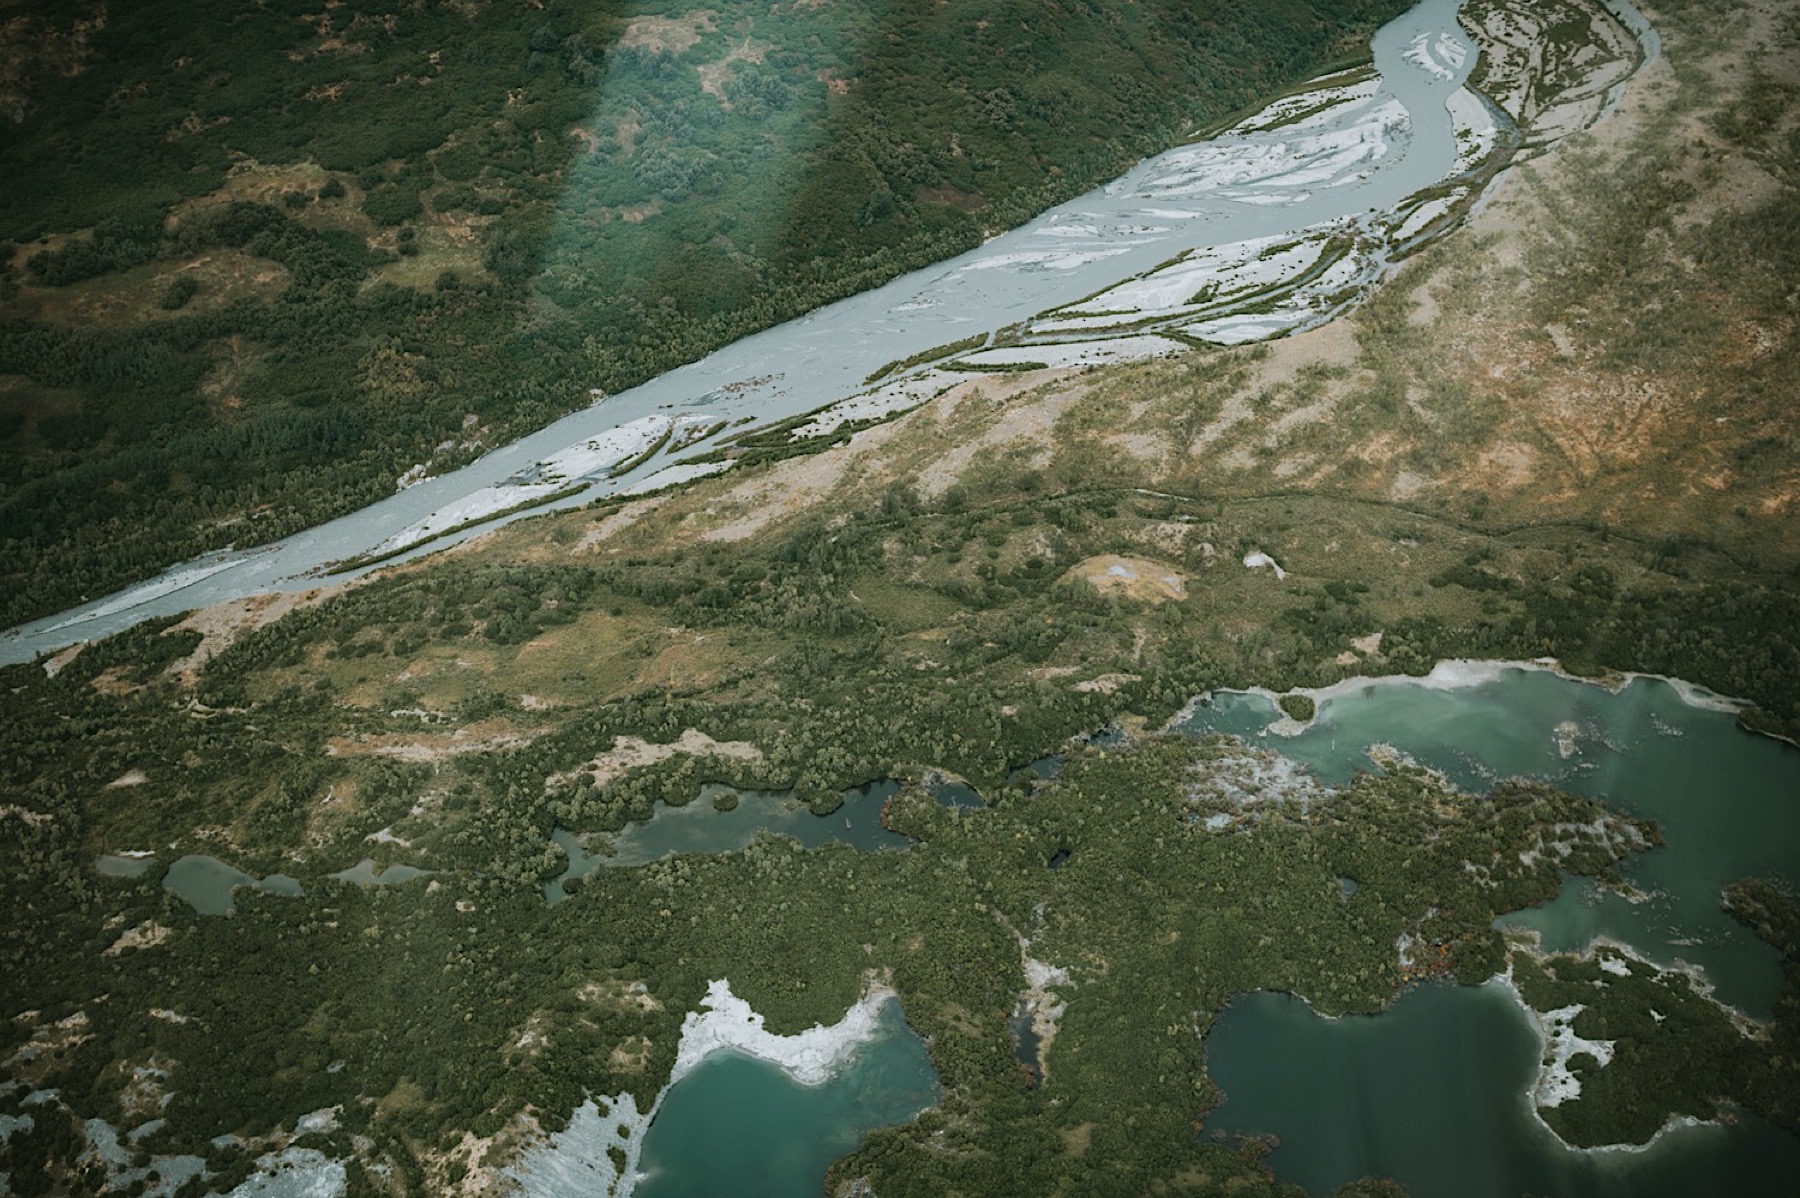 Aerial view of Knik river area from a helicopter